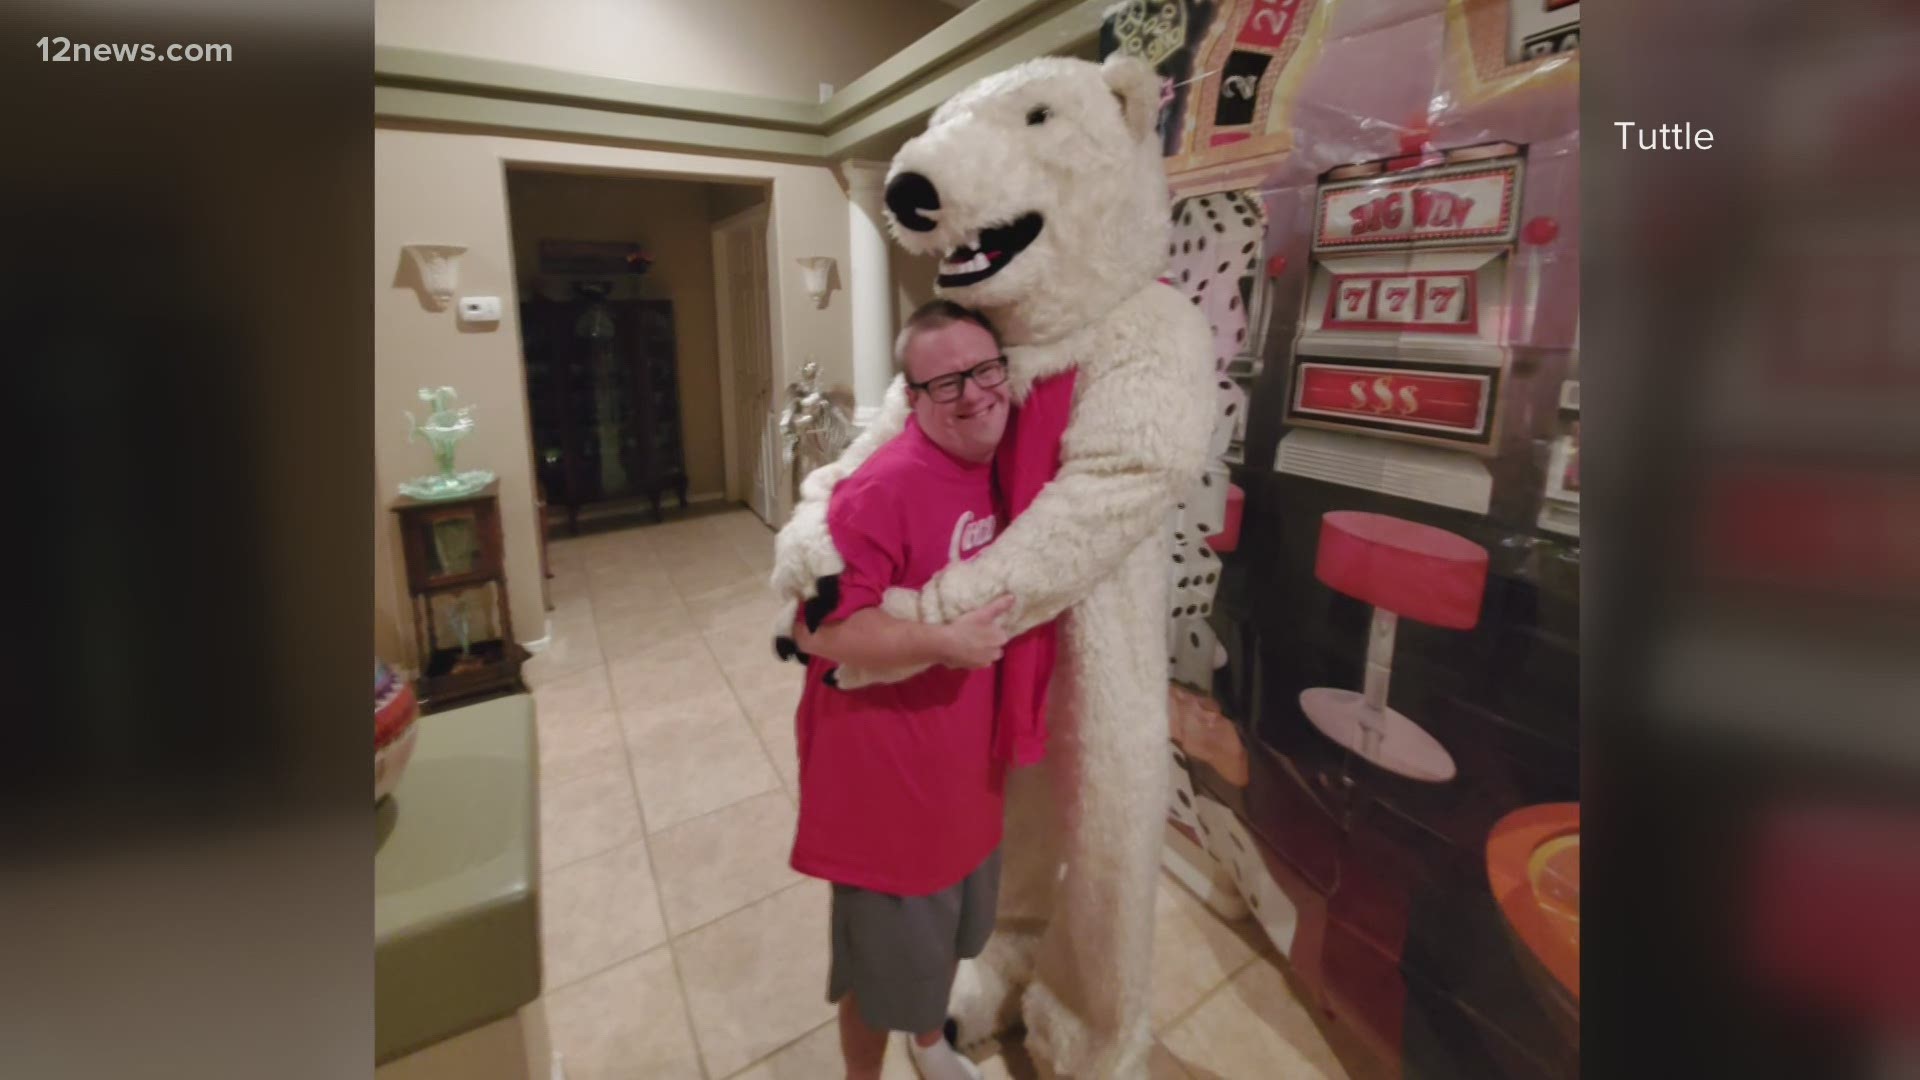 Brenden's birthday trip to Las Vegas was put on hold due to the COVID-19 pandemic, but 12 News viewers helped give him an even more memorable birthday.